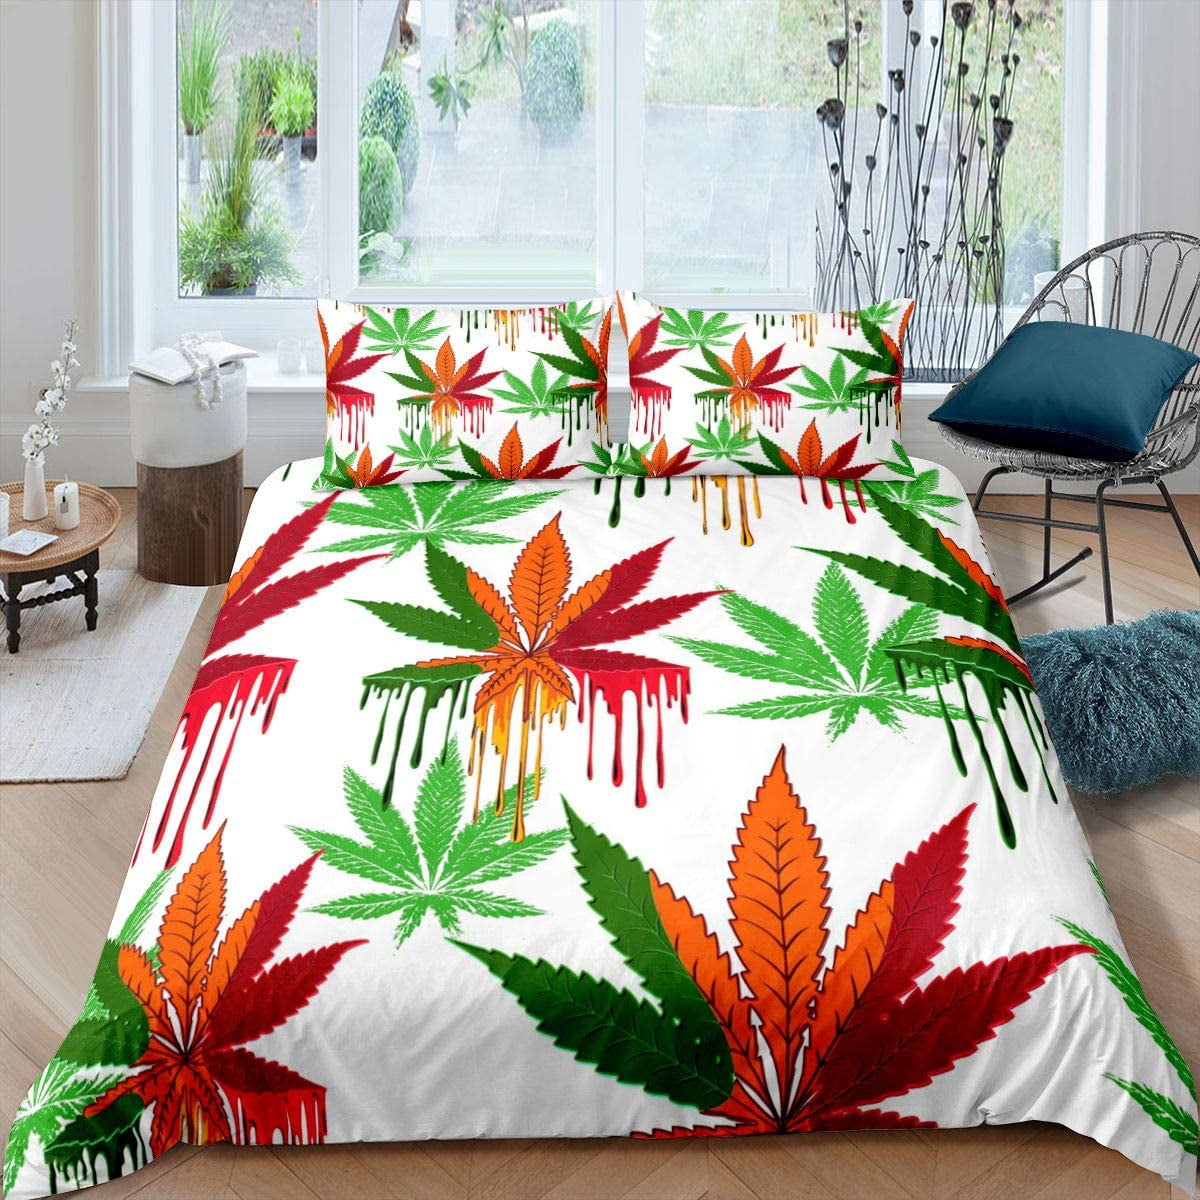 Marijuana Leaf Comforter Cover Twin Green Trippy Leaves Decor Bedding Set for Adult Women Teens Boho Abstract Exotic Style Duvet Cover Cannabis Leaves Printed Bedspread Bohemian Rustic Quilt Cover